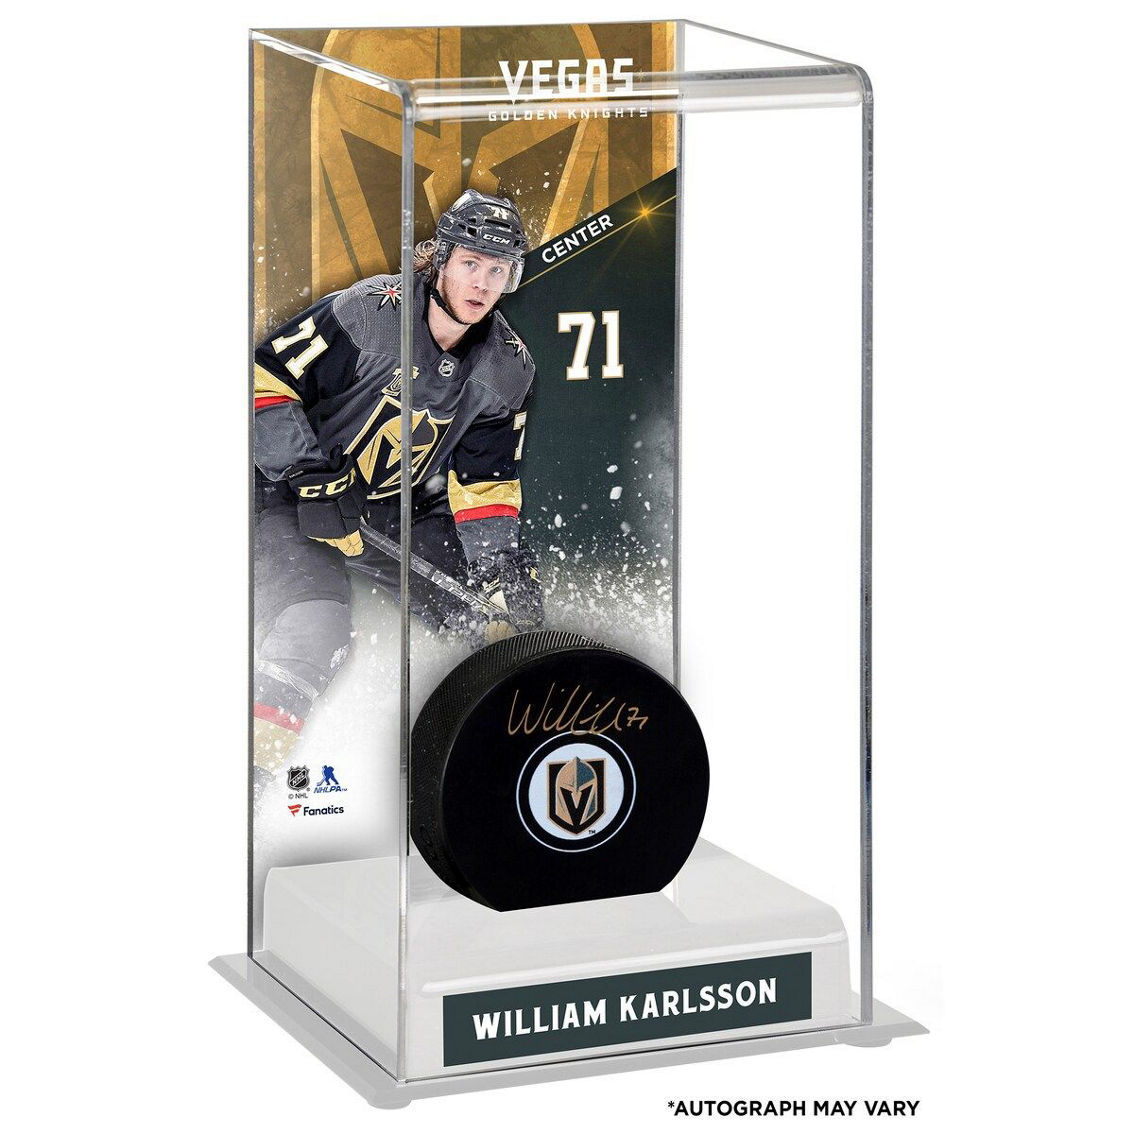 Fanatics Authentic William Karlsson Vegas Golden Knights Autographed Puck with Deluxe Tall Hockey Puck Case - Image 2 of 2